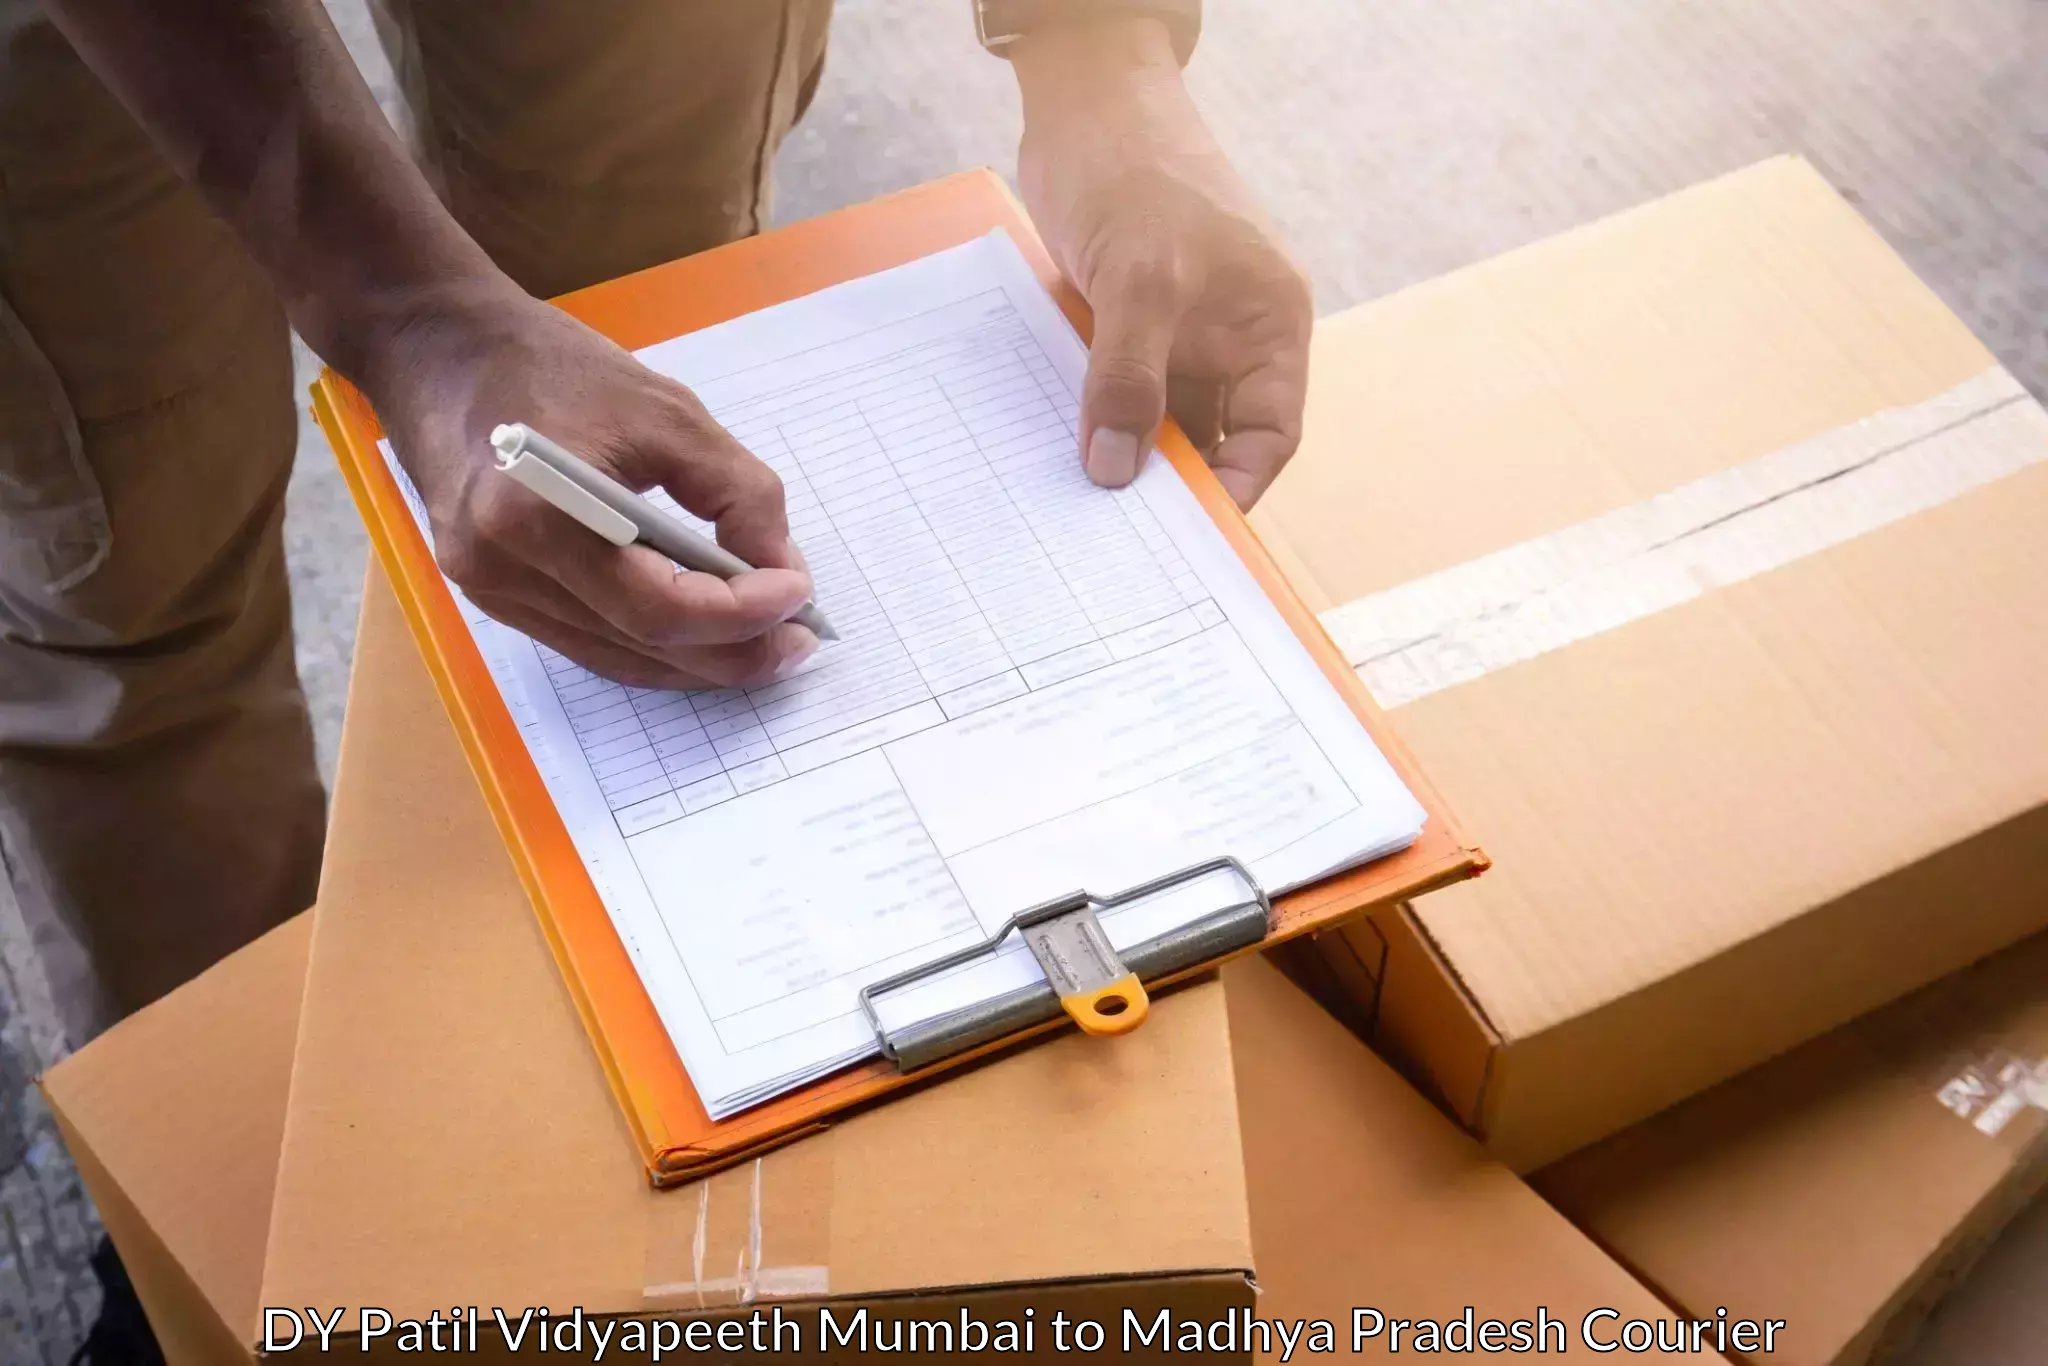 Tailored delivery services DY Patil Vidyapeeth Mumbai to Amarkantak